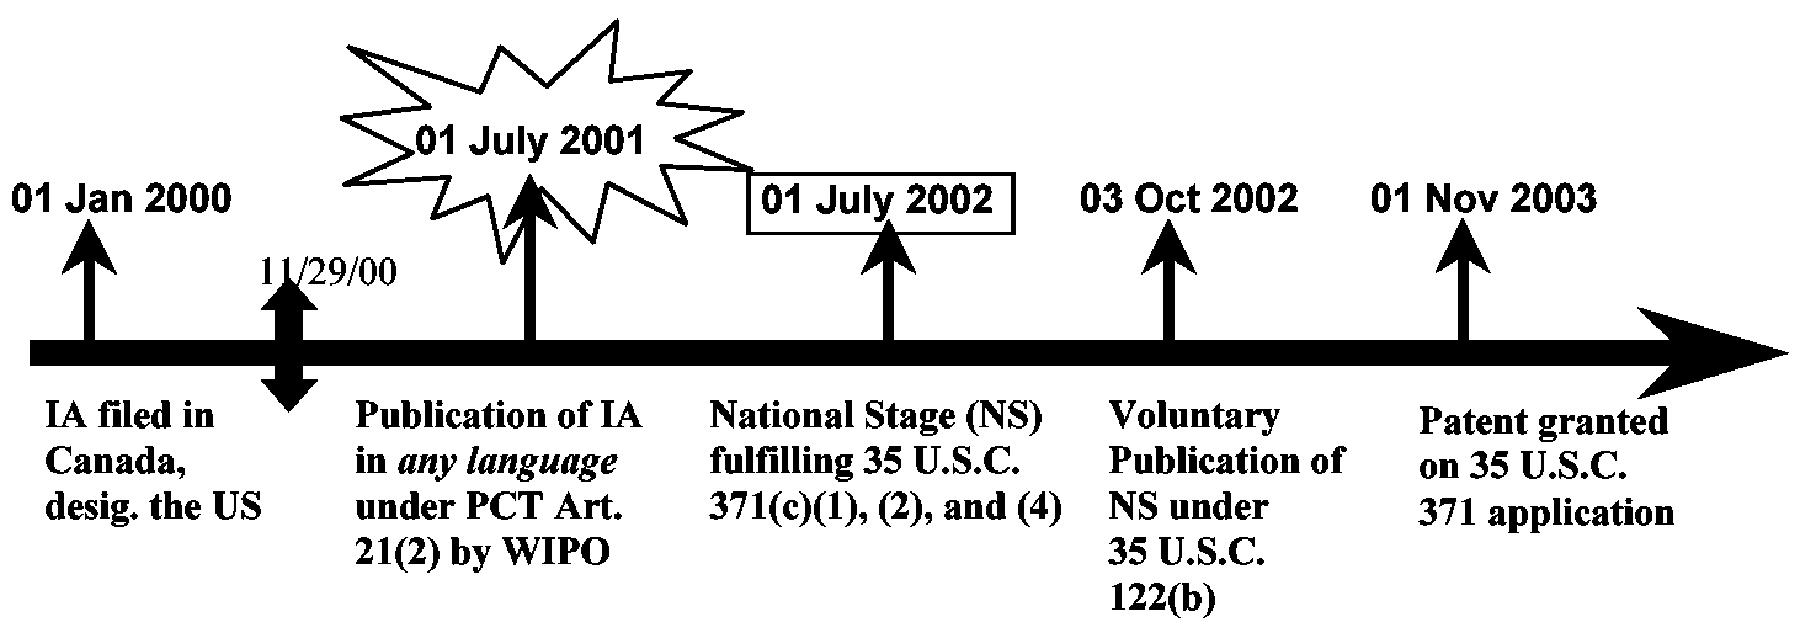 Example 6: References based on the national stage (35 U.S.C. 371) of an International Application filed prior to November 29, 2000 (language of the publication under PCT Article 21(2) is not relevant).